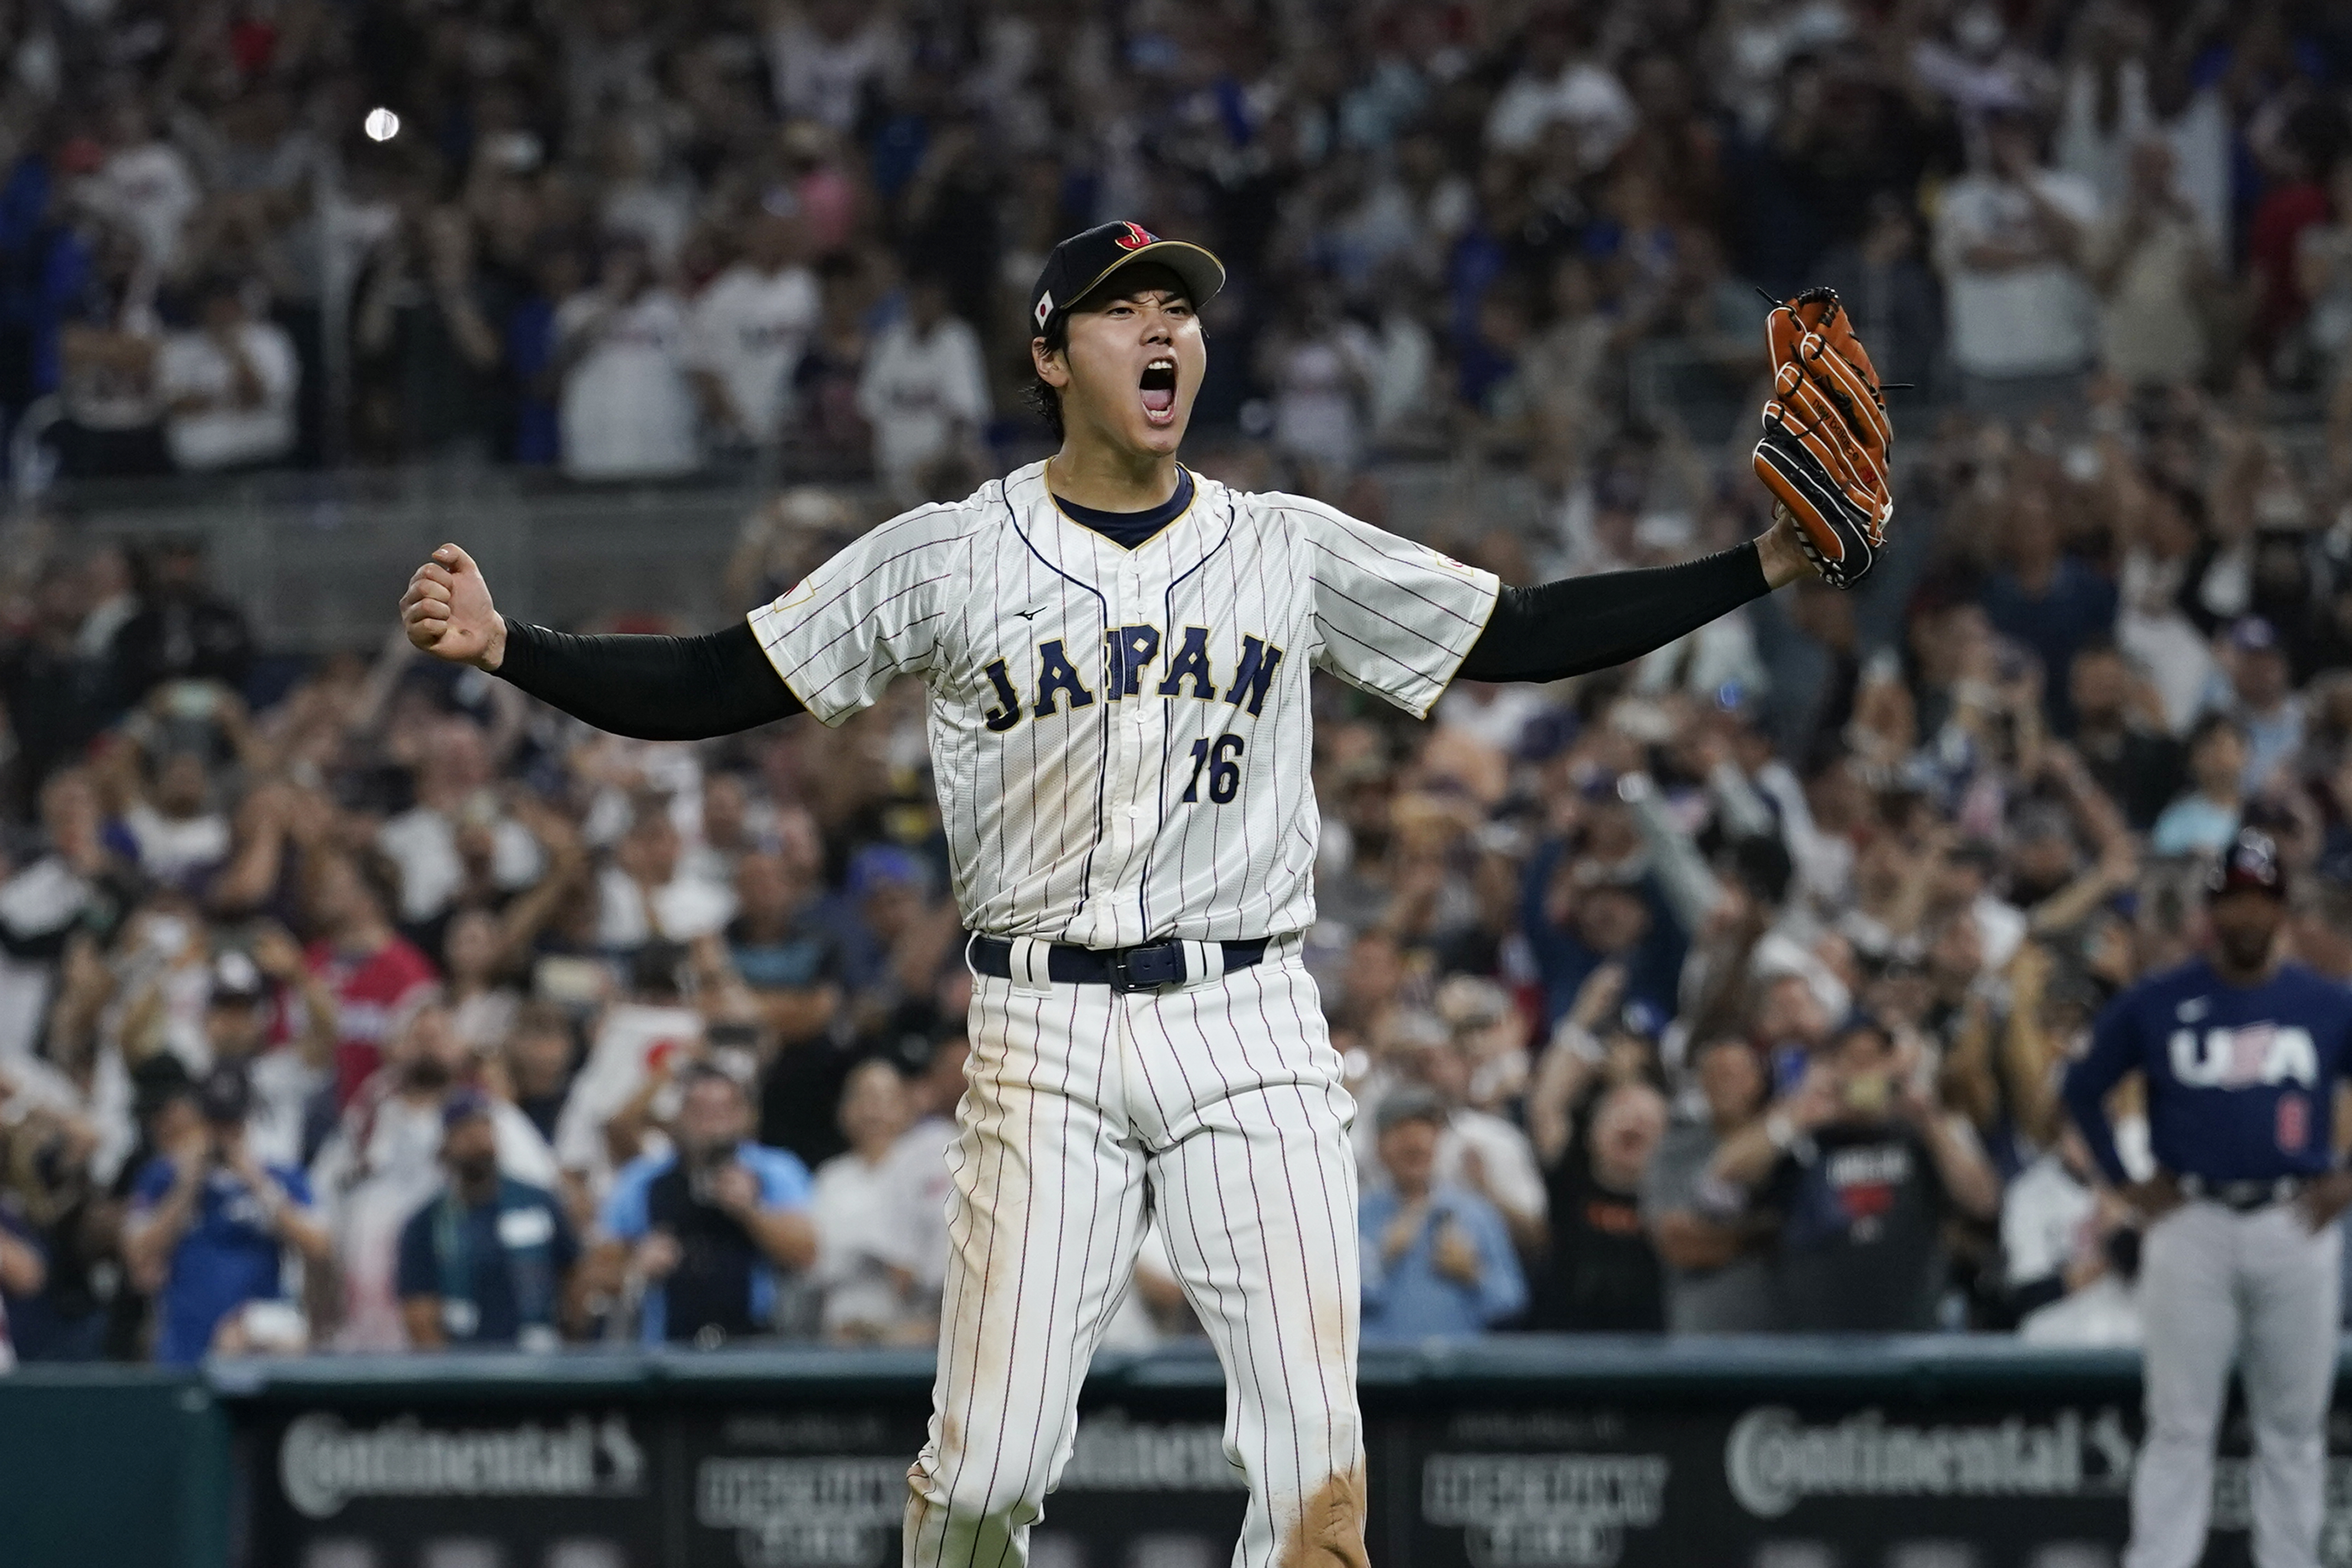 Samurai Japan manager wants Shohei Ohtani to hit and pitch during